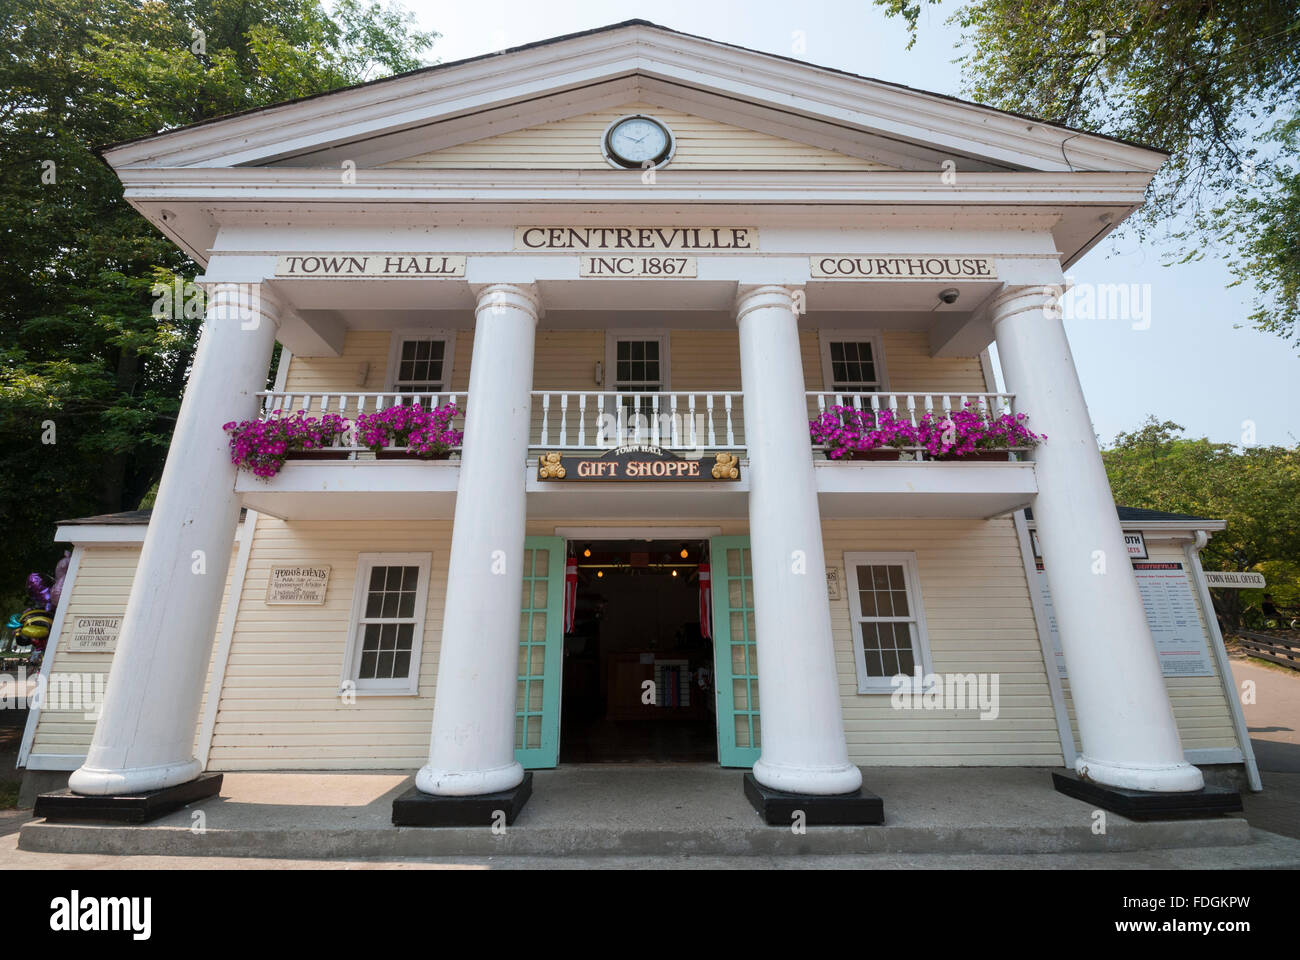 The Centreville town hall and courthouse facade near the entrance of the Centreville Amusement Park on the Toronto Islands. Stock Photo